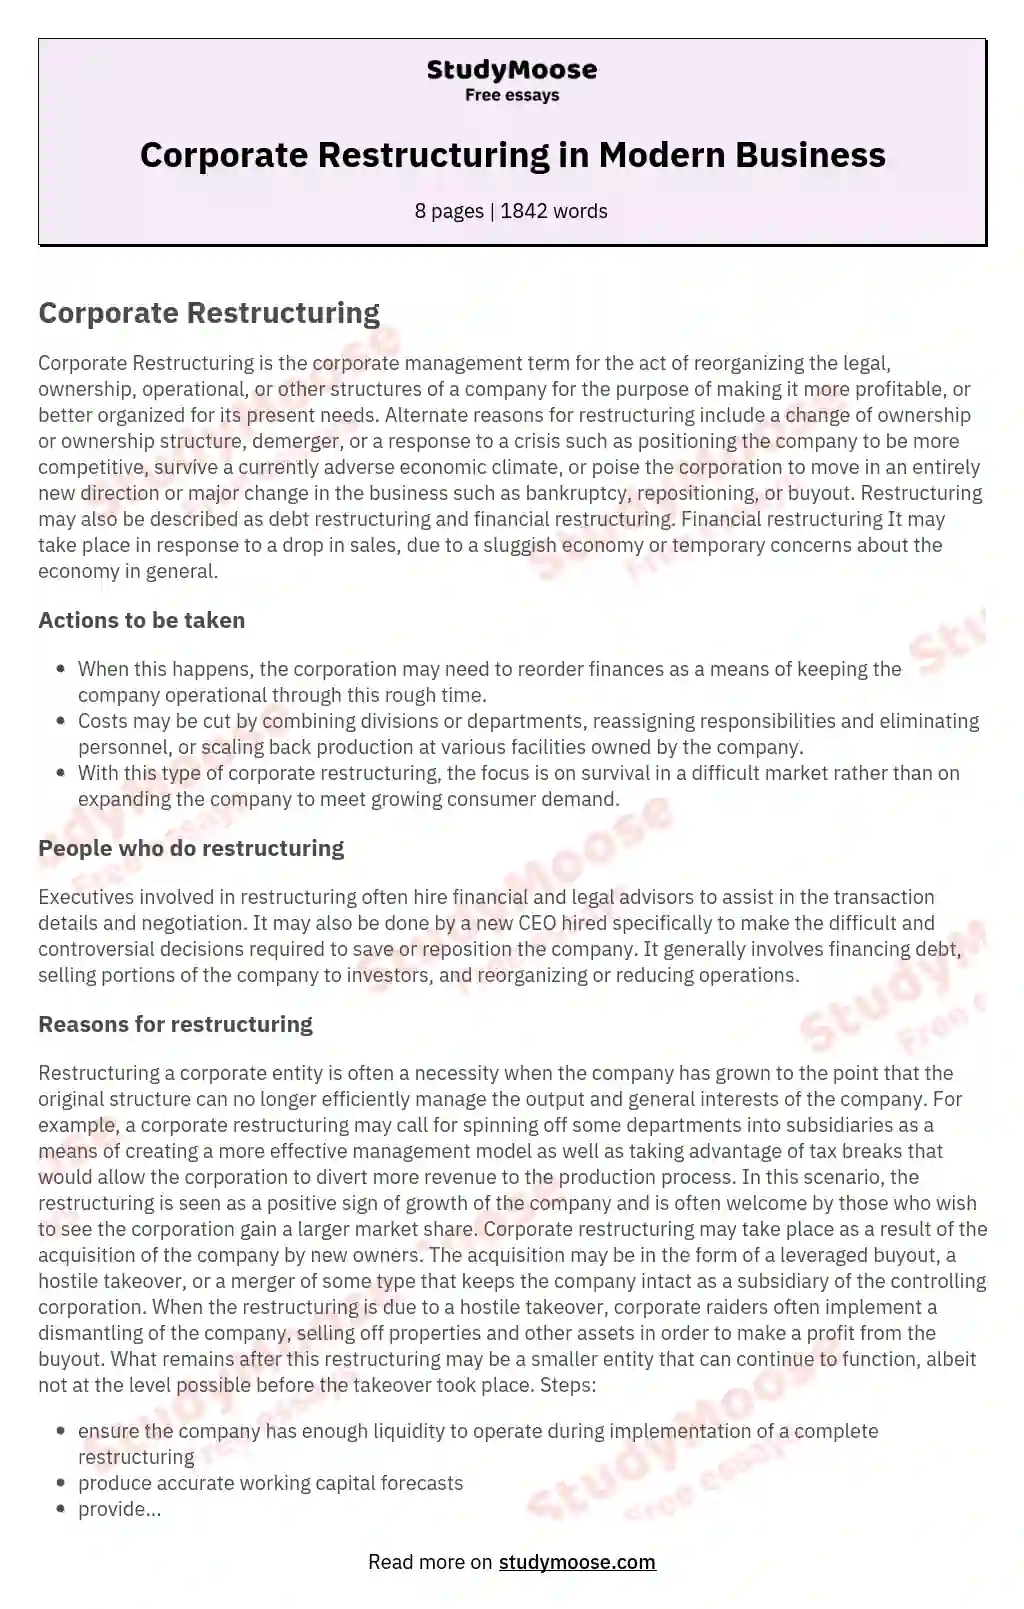 Corporate Restructuring in Modern Business essay